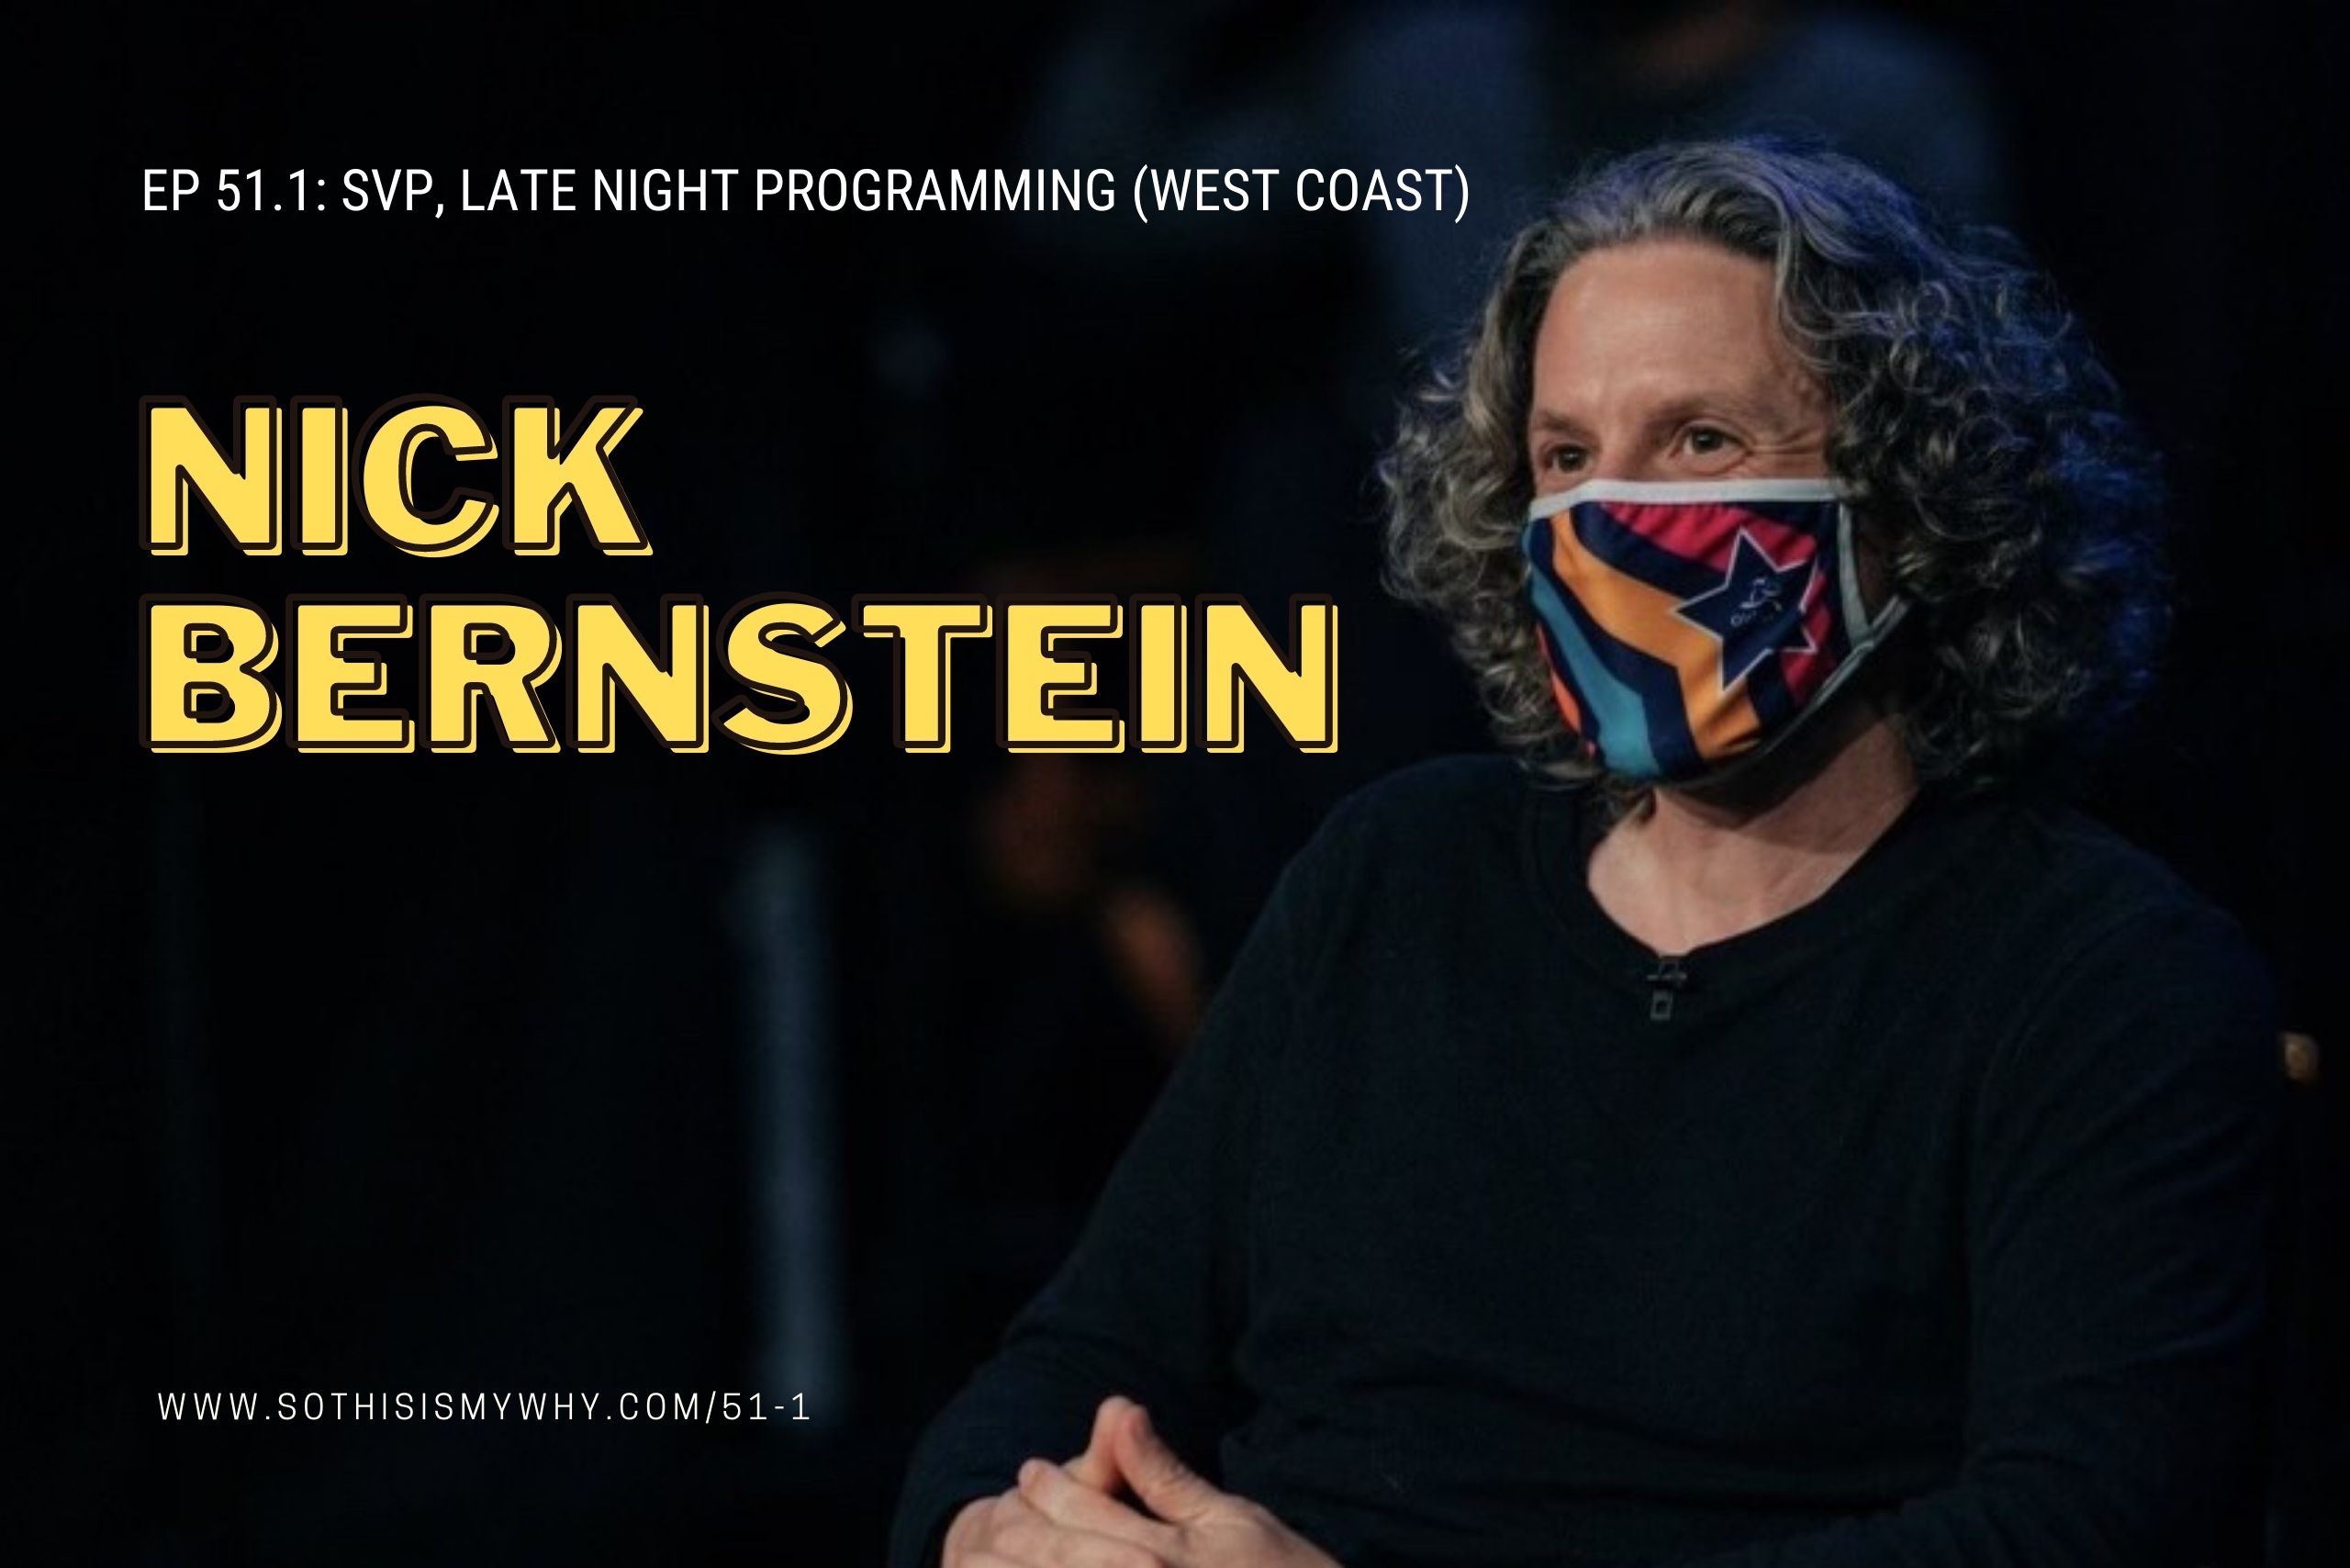 Nick Bernstein - Senior Vice President of Late Night Programming (West Coast) at ViacomCBS; executive in charge of the Late Late Show with James Corden